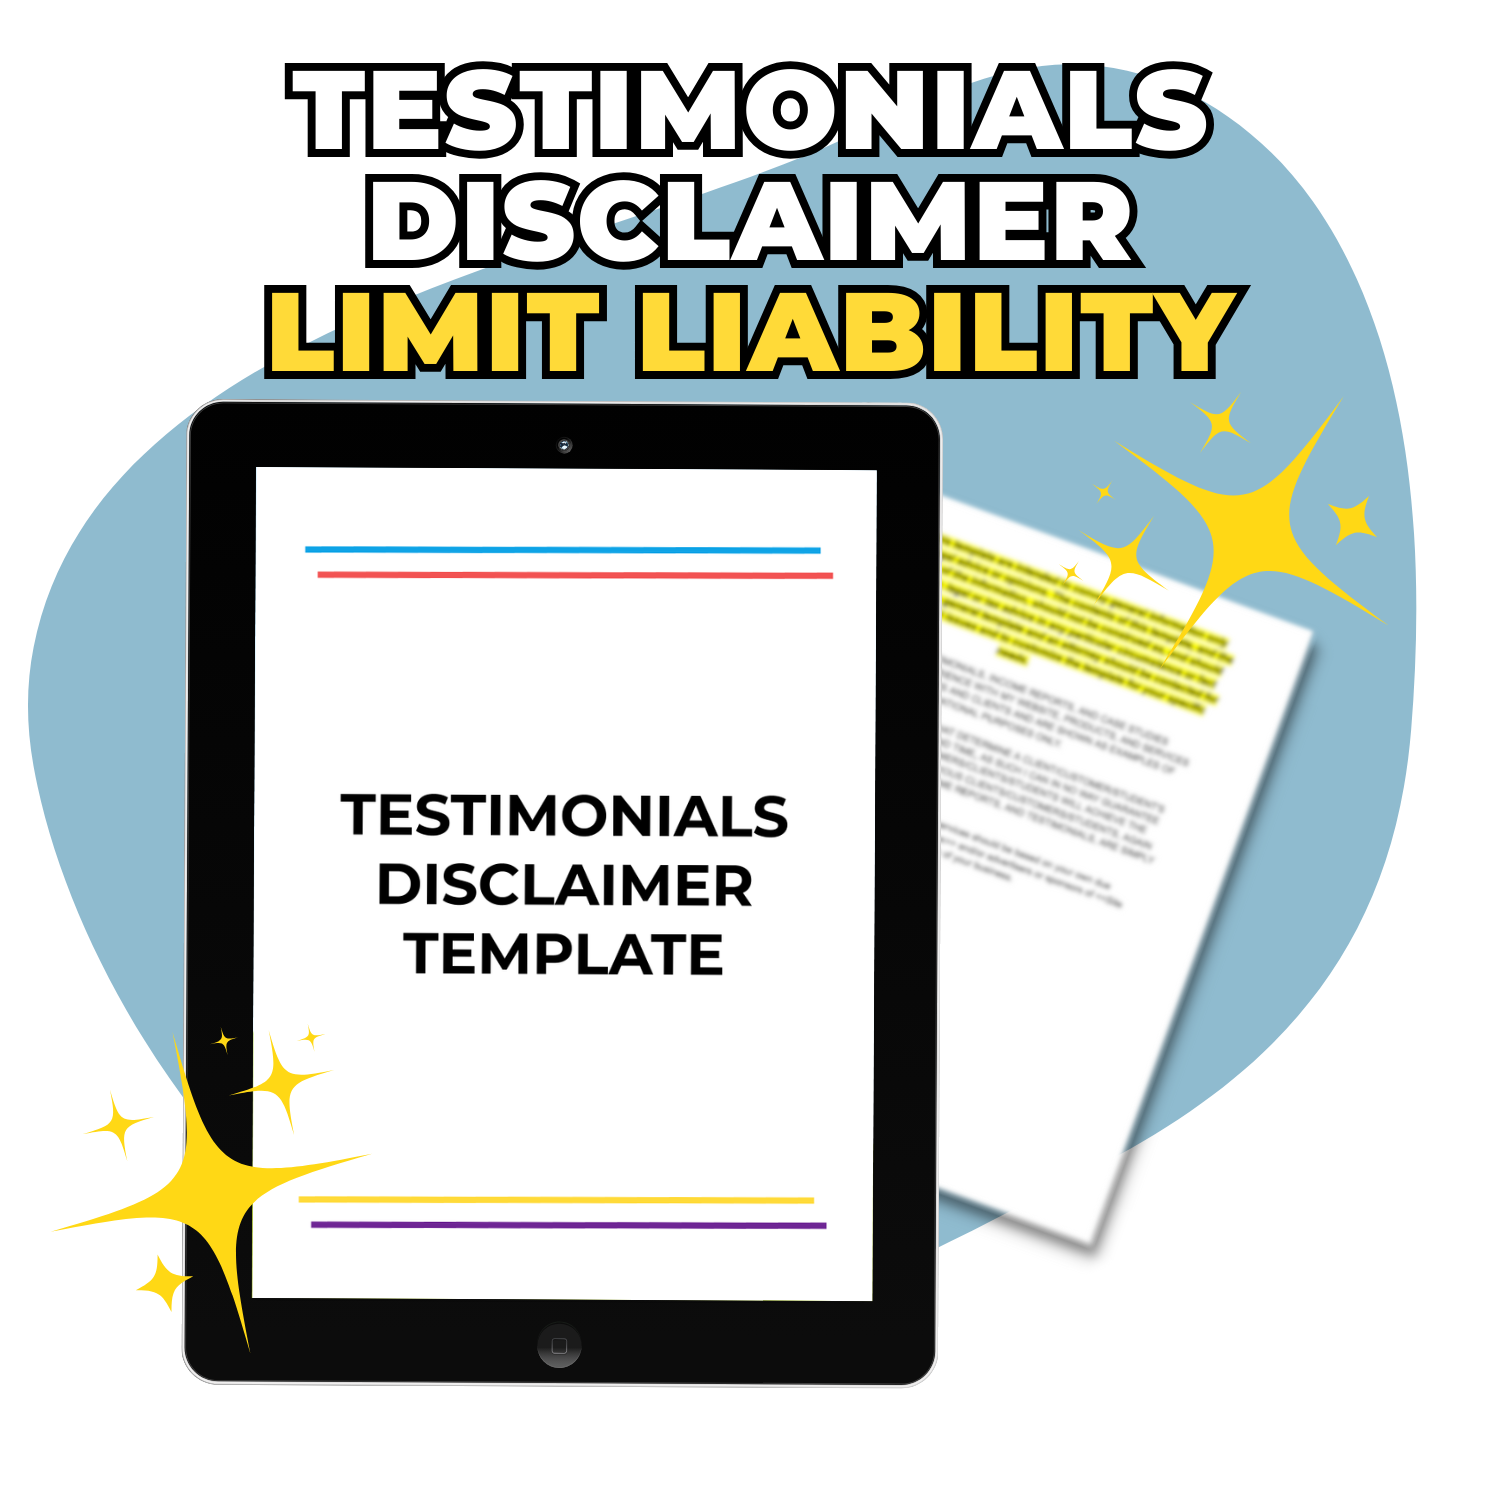 Graphic of a tablet displaying the Testimonials Disclaimer Template from ElizabethStapleton.com and documents with &quot;limit liability&quot; text, surrounded by sparkles on a blue background.